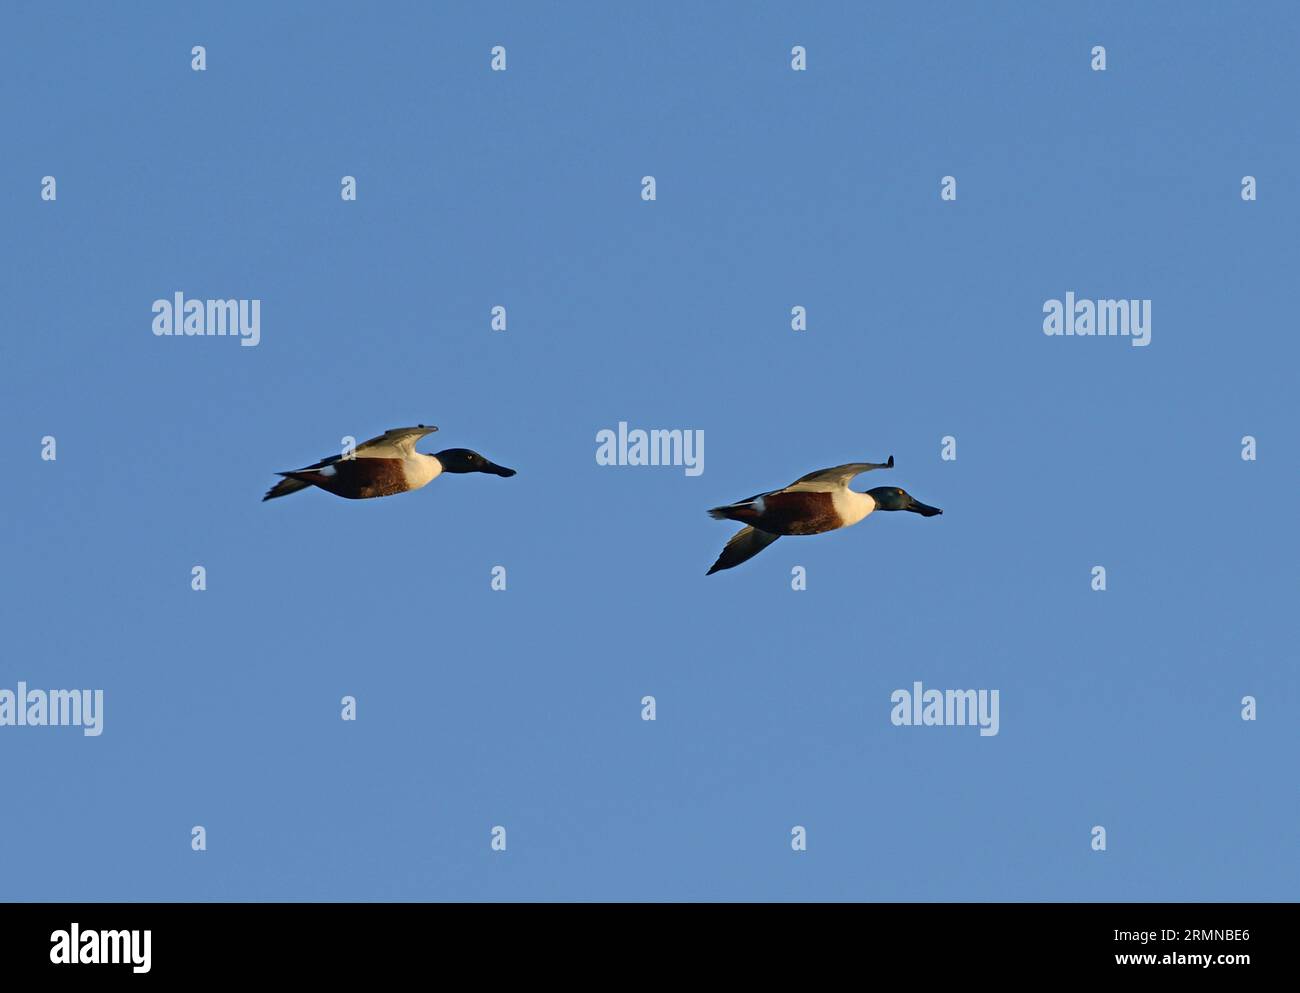 Colour image of a pair of Shoveler ducks against a blue sky flying from left to right with one behind the other Stock Photo